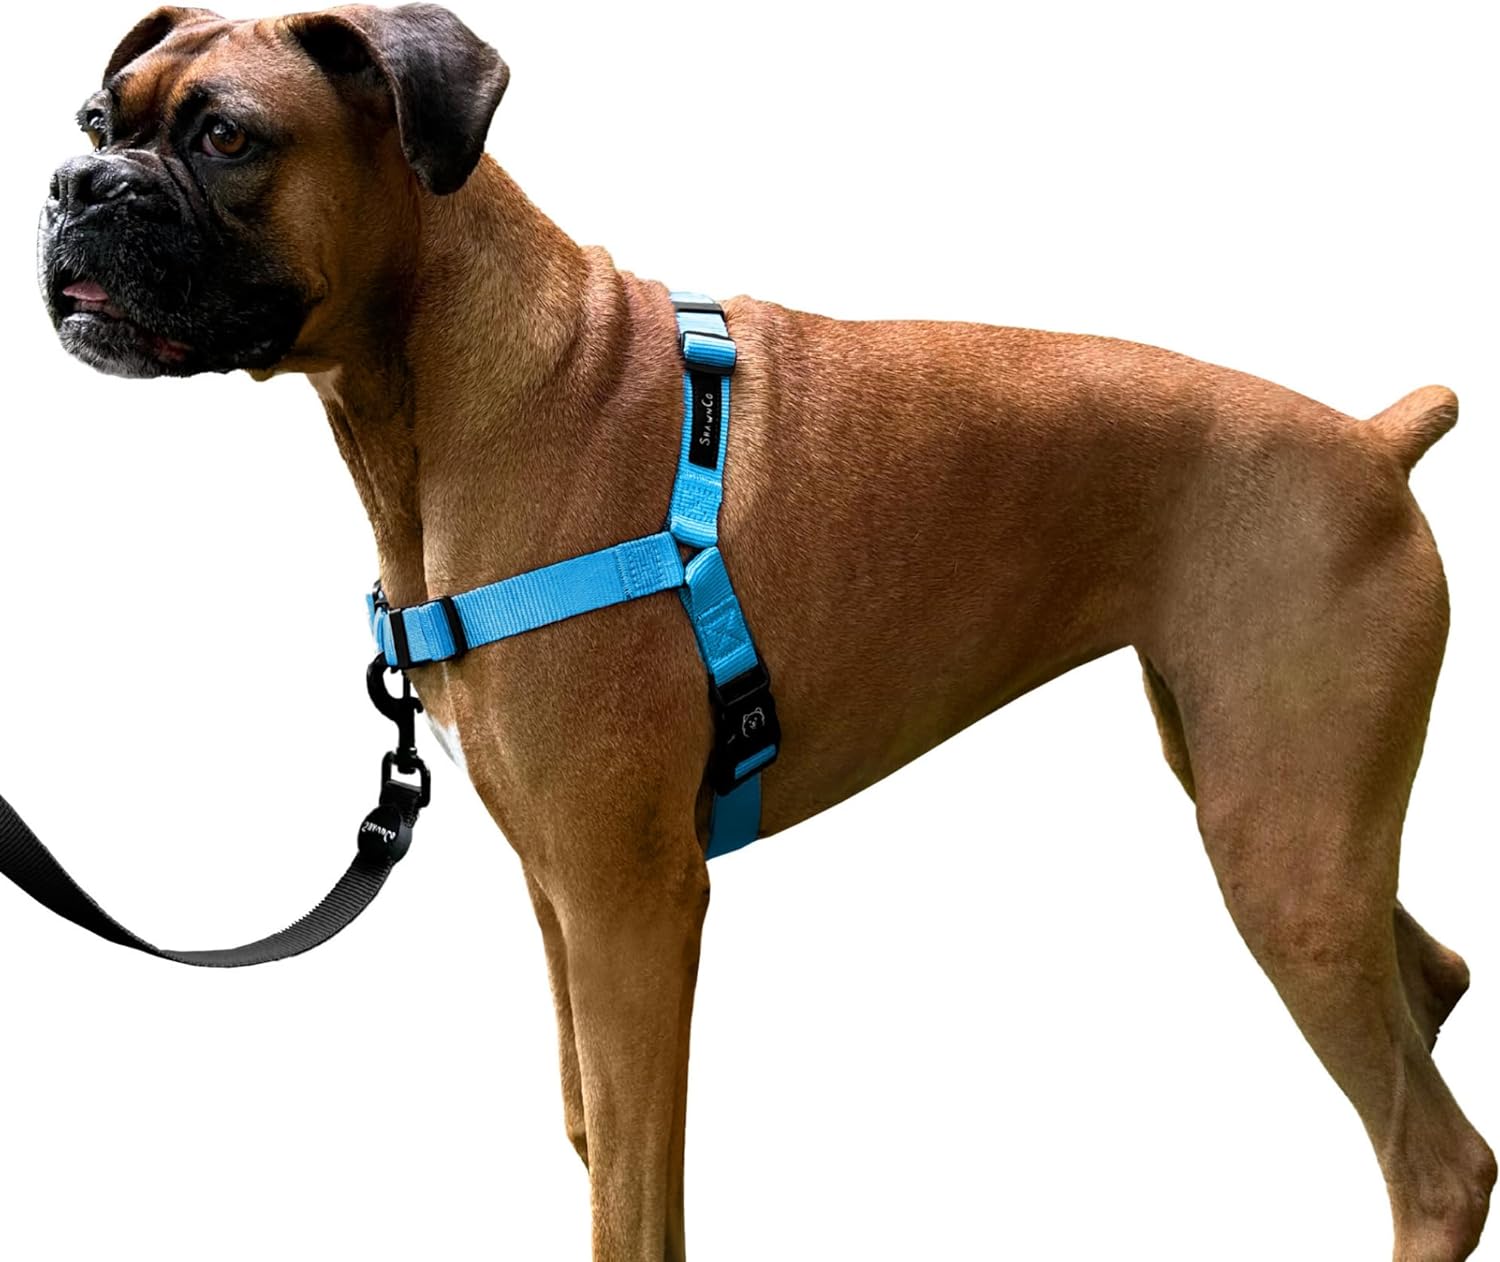 ShawnCo Dream Walk No-Pull Dog Harness- Adjustable, Comfortable, Easy to Use Pet Halter to Help Stop Pulling for Small, Medium and Large Dogs (Rose Gold, M)